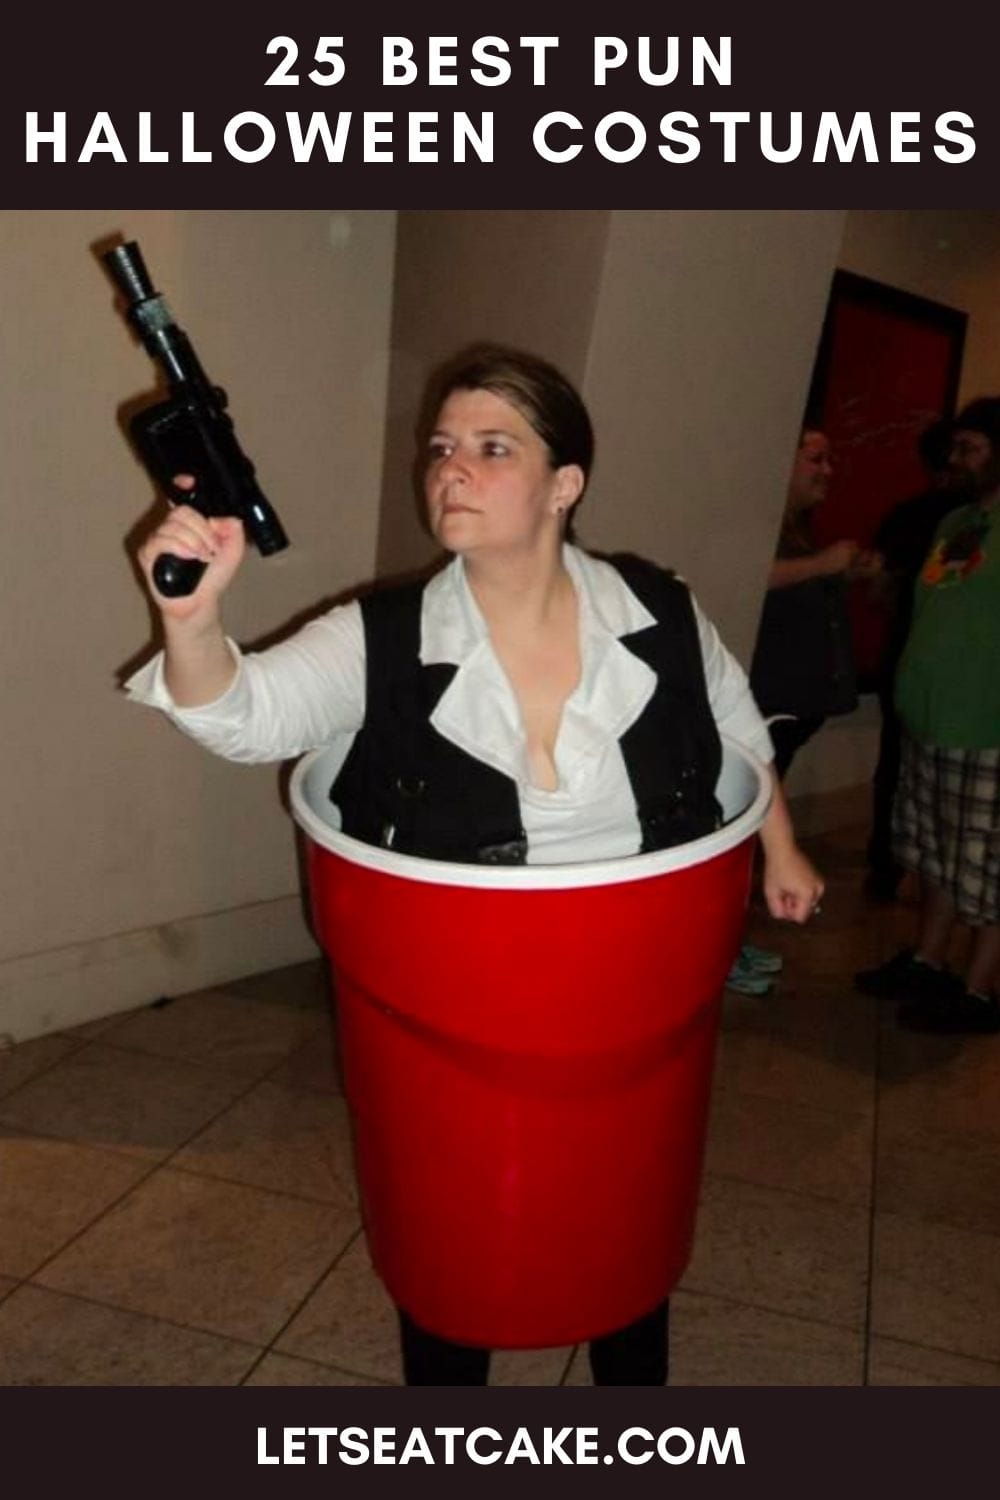 25 Punny Halloween Costume Ideas to Try This Year Darcy